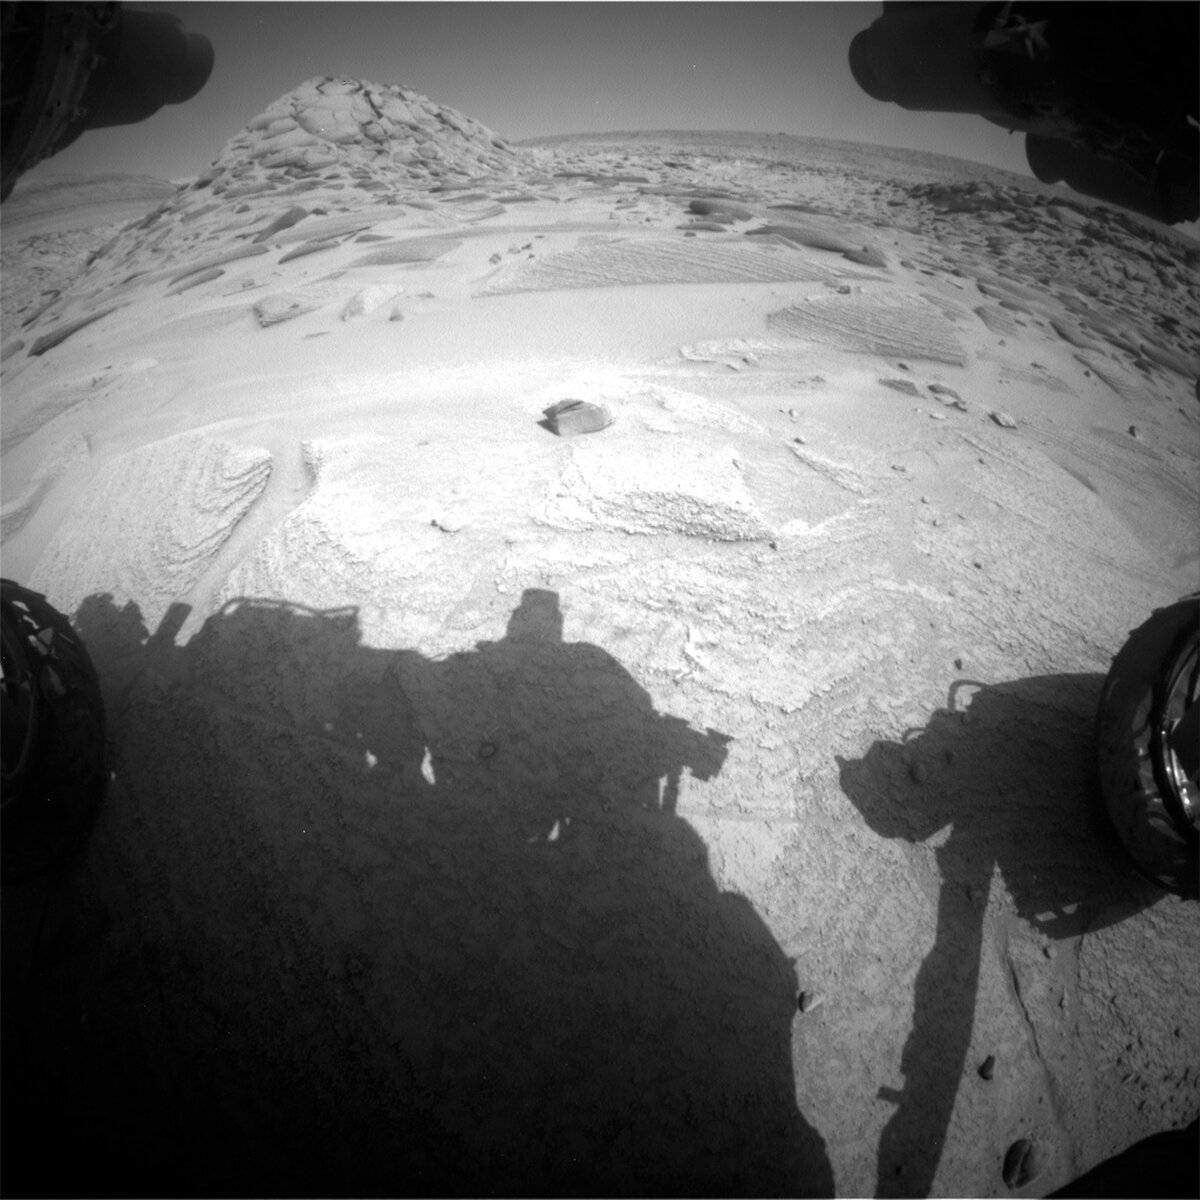 This image shows the shadow of the Curiosity rover above the Mars surface with rocks and a hill in the distance, including float block target "Rio Urubu."